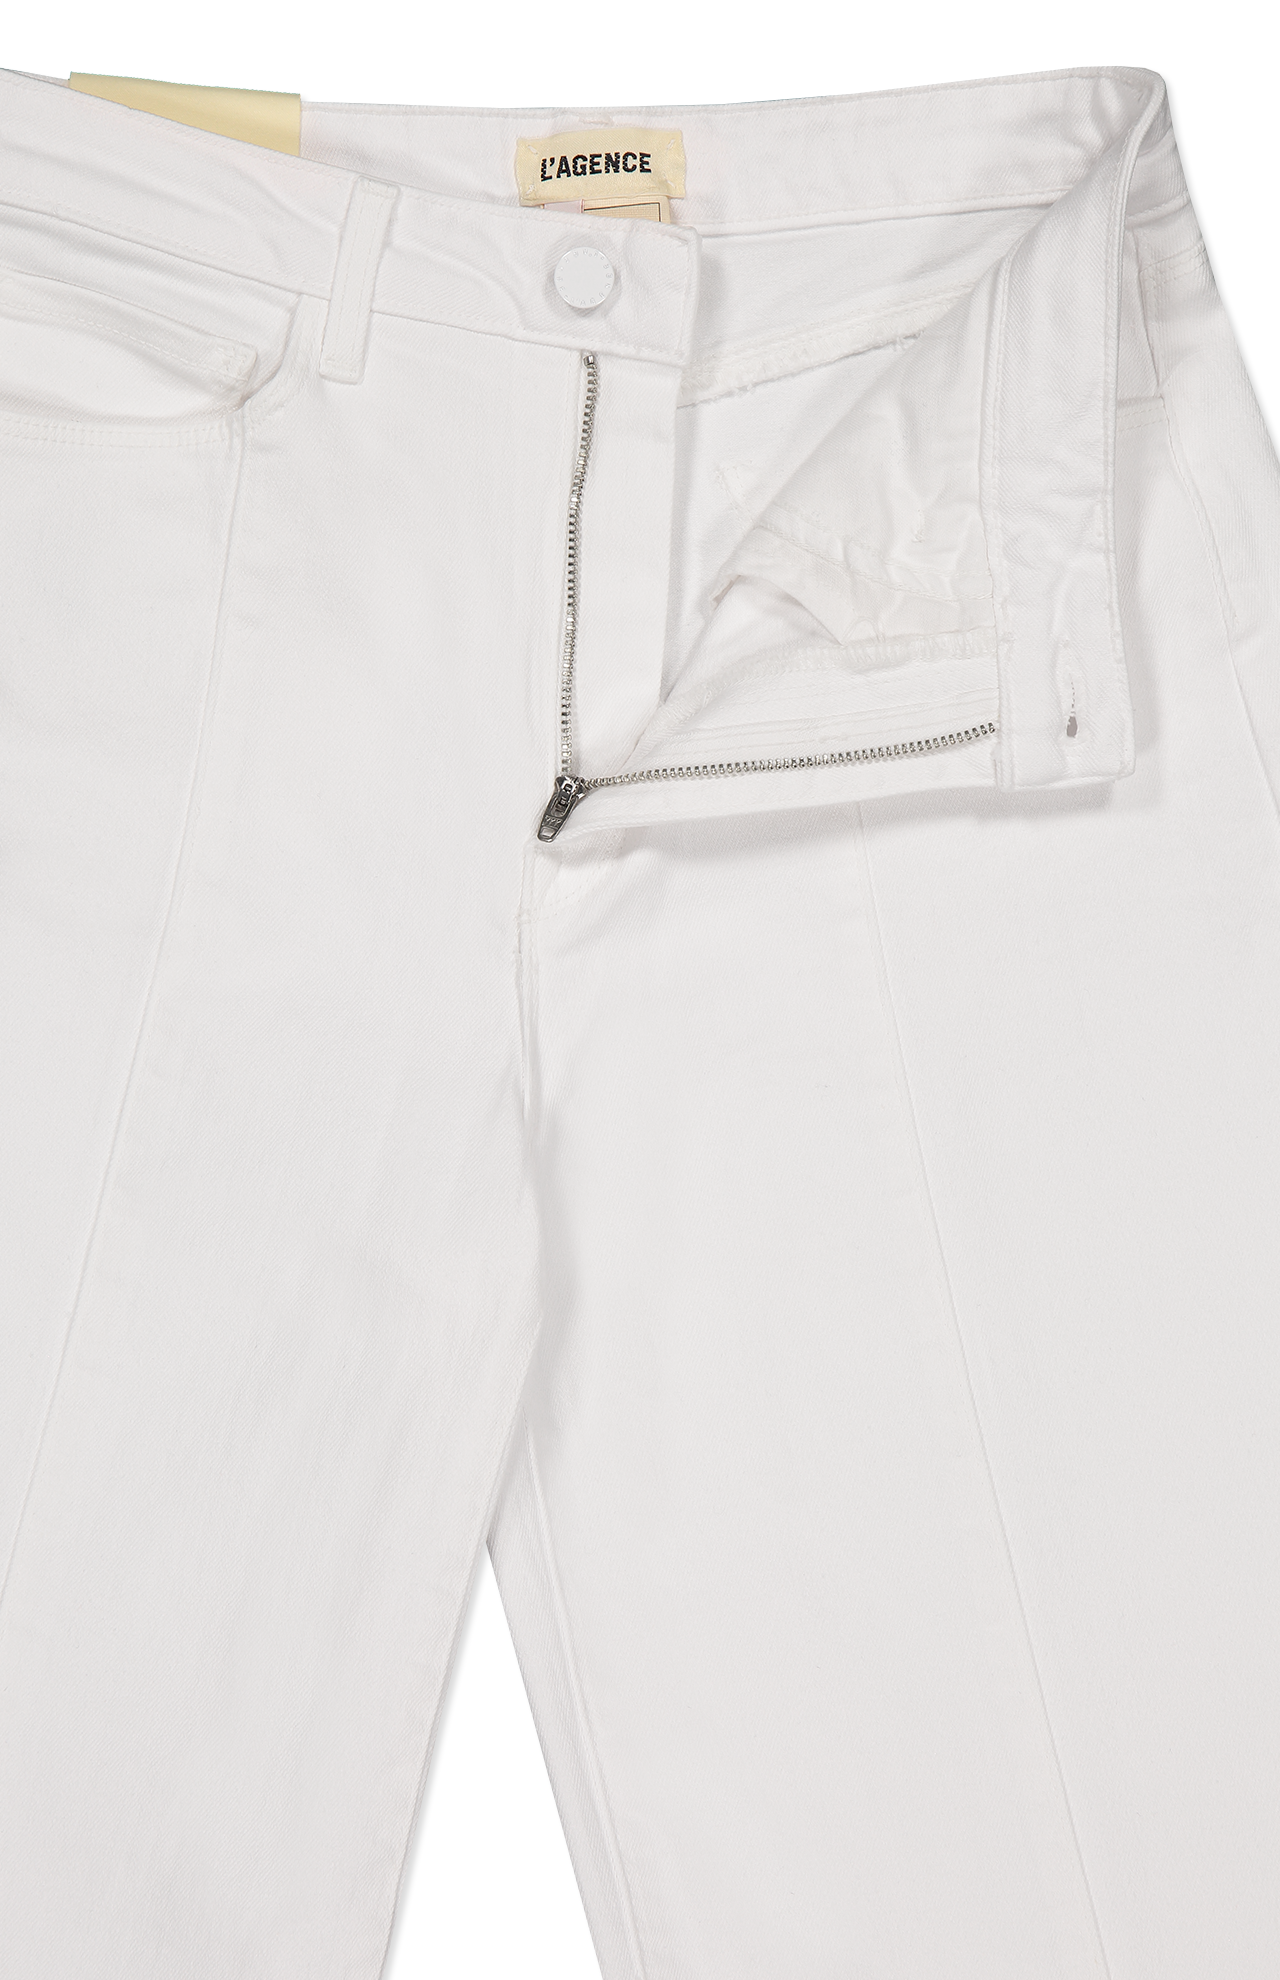 Lagence Sandy H/R Wide Leg Jeans White Fly Detail Image (6941051158643)